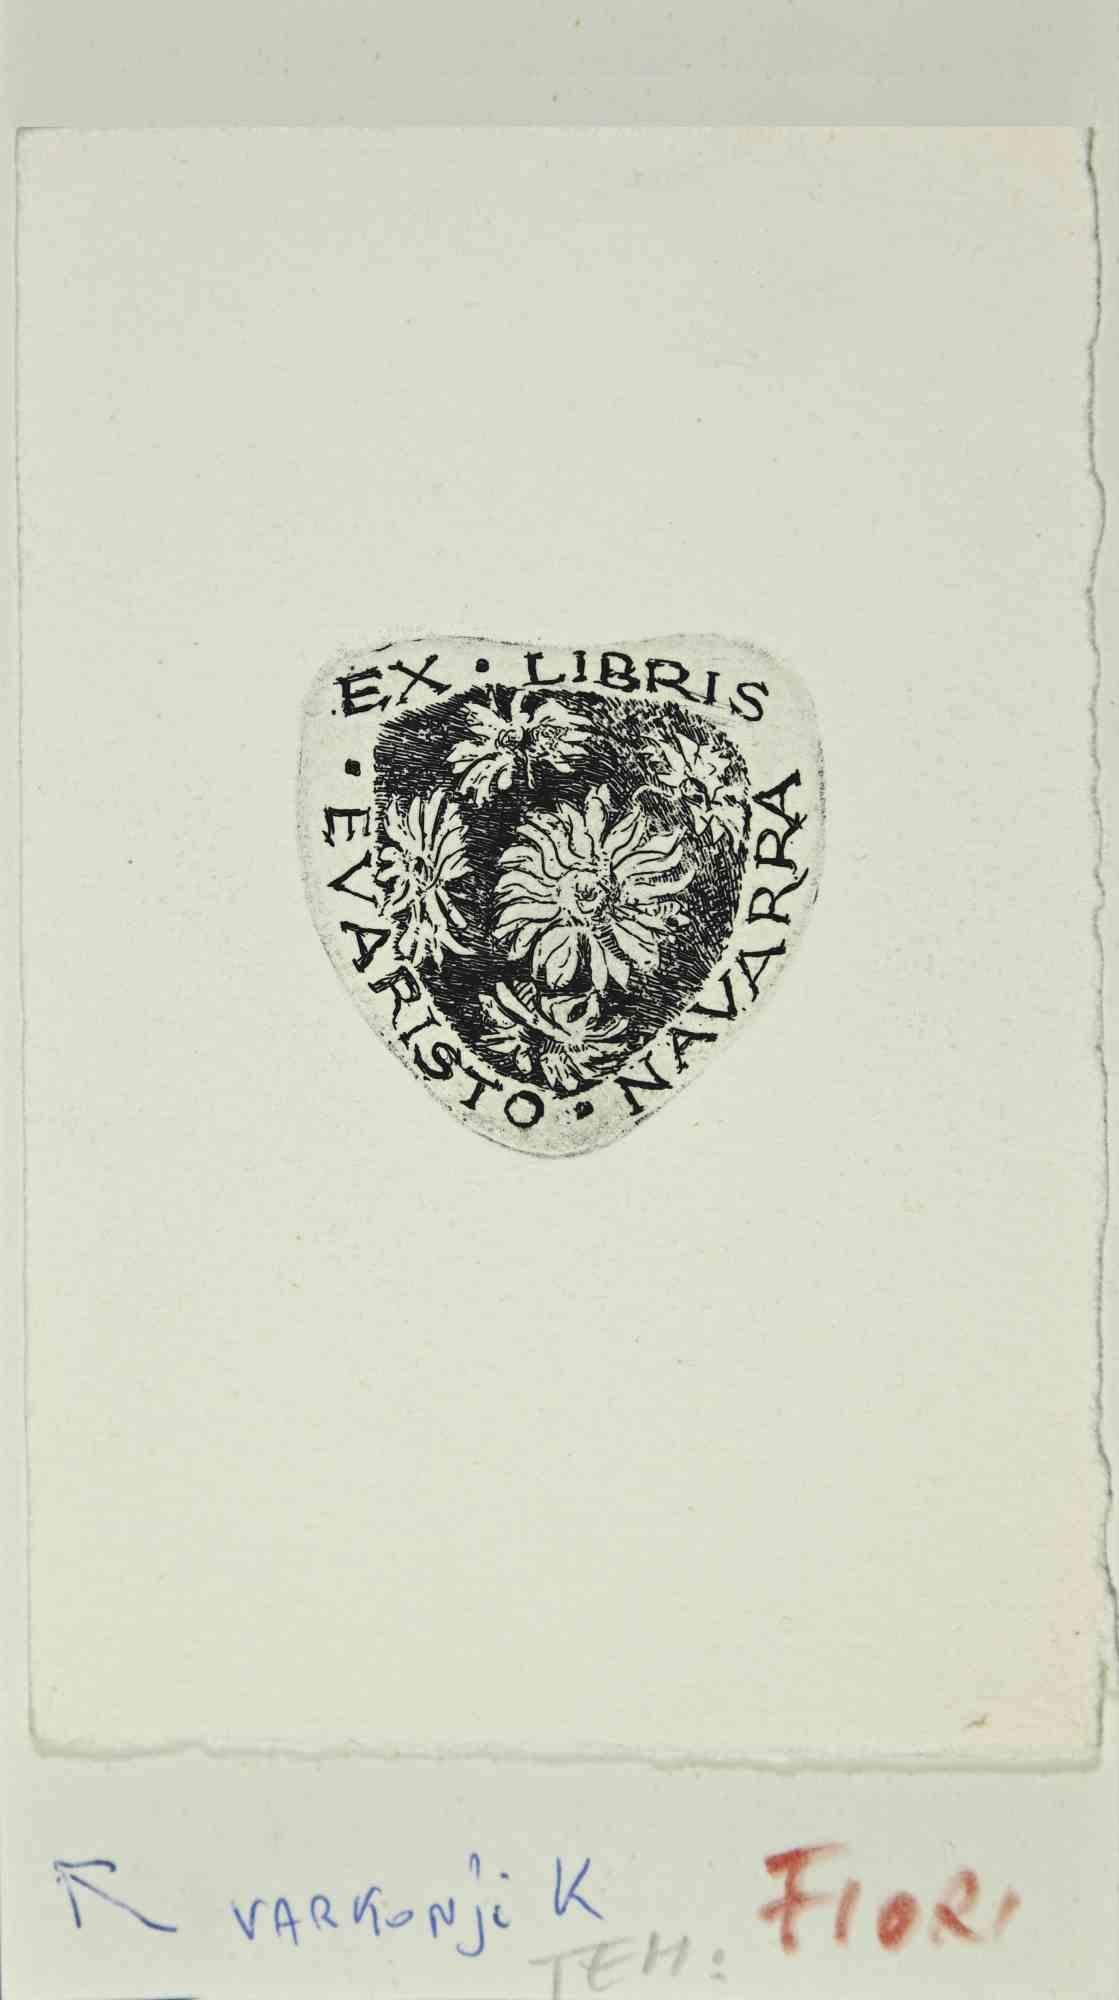 Ex Libris - E. Varisto Navarra is an Artwork realized in 1960 s. by the Artist K. Varkonji.

Etching B./W. print on ivory paper.

The work is glued on ivory  cardboard.

Total dimensions: 16x9 cm.

Good conditions.

The artist wants to define a